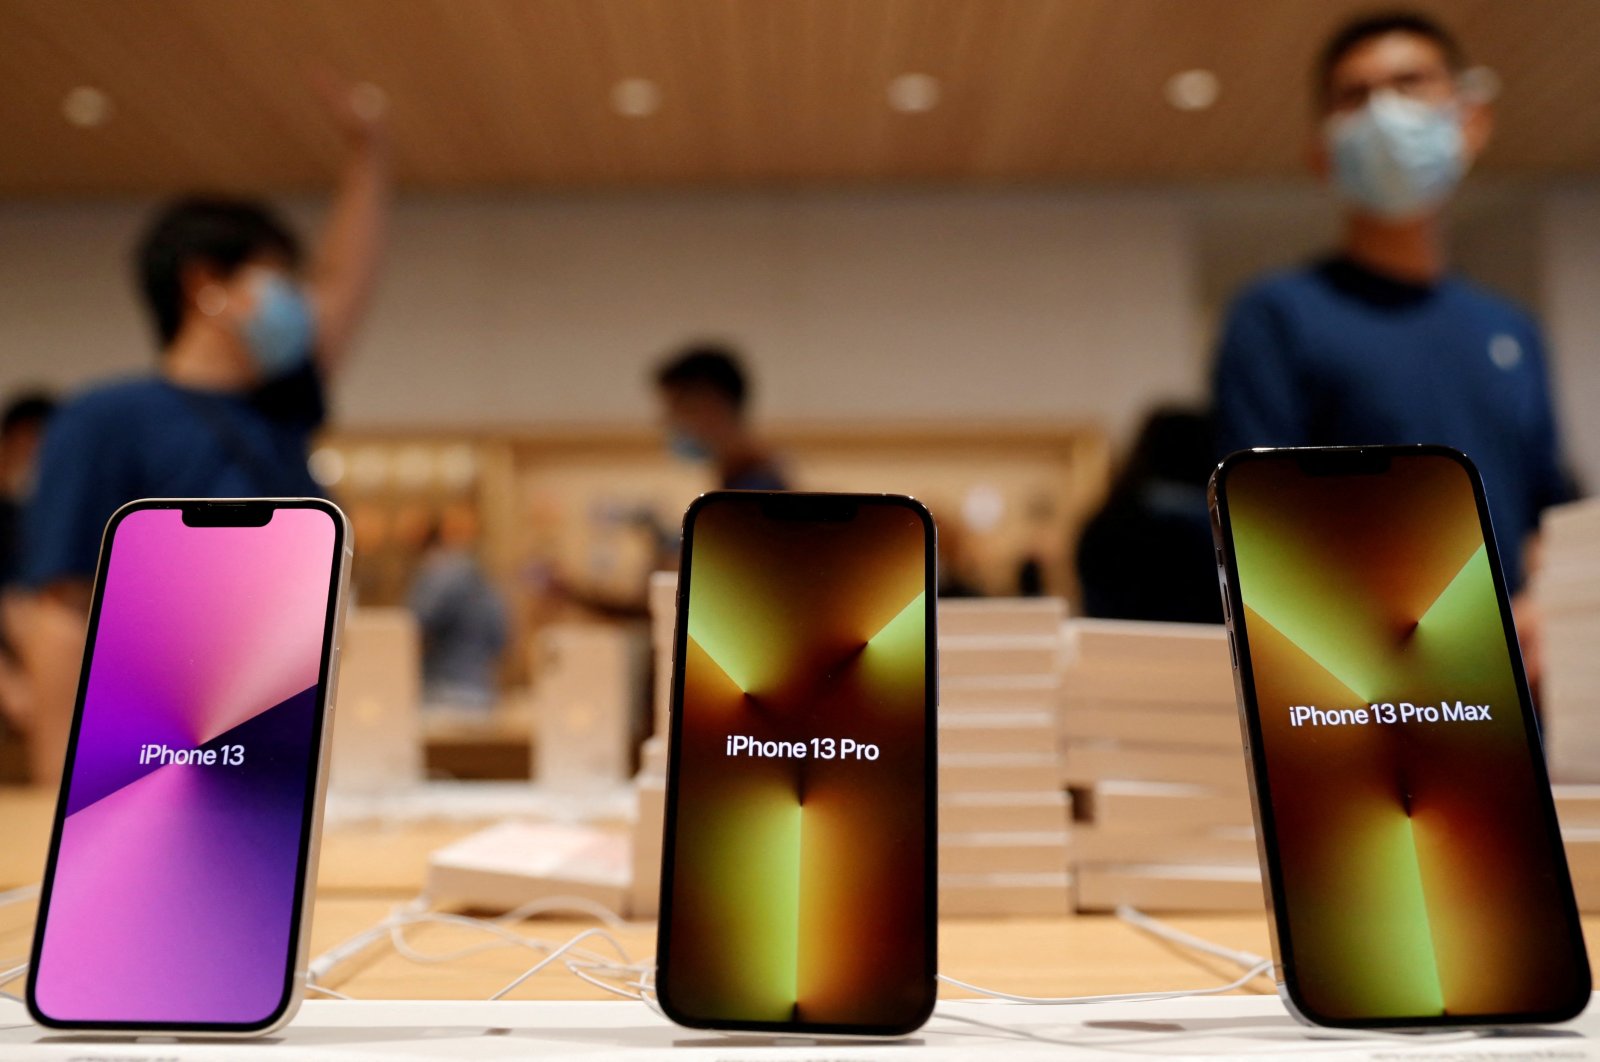 Apple&#039;s iPhone 13 models are pictured at an Apple Store on the day the new Apple iPhone 13 series goes on sale, in Beijing, China, Sept. 24, 2021. (Reuters File Photo)